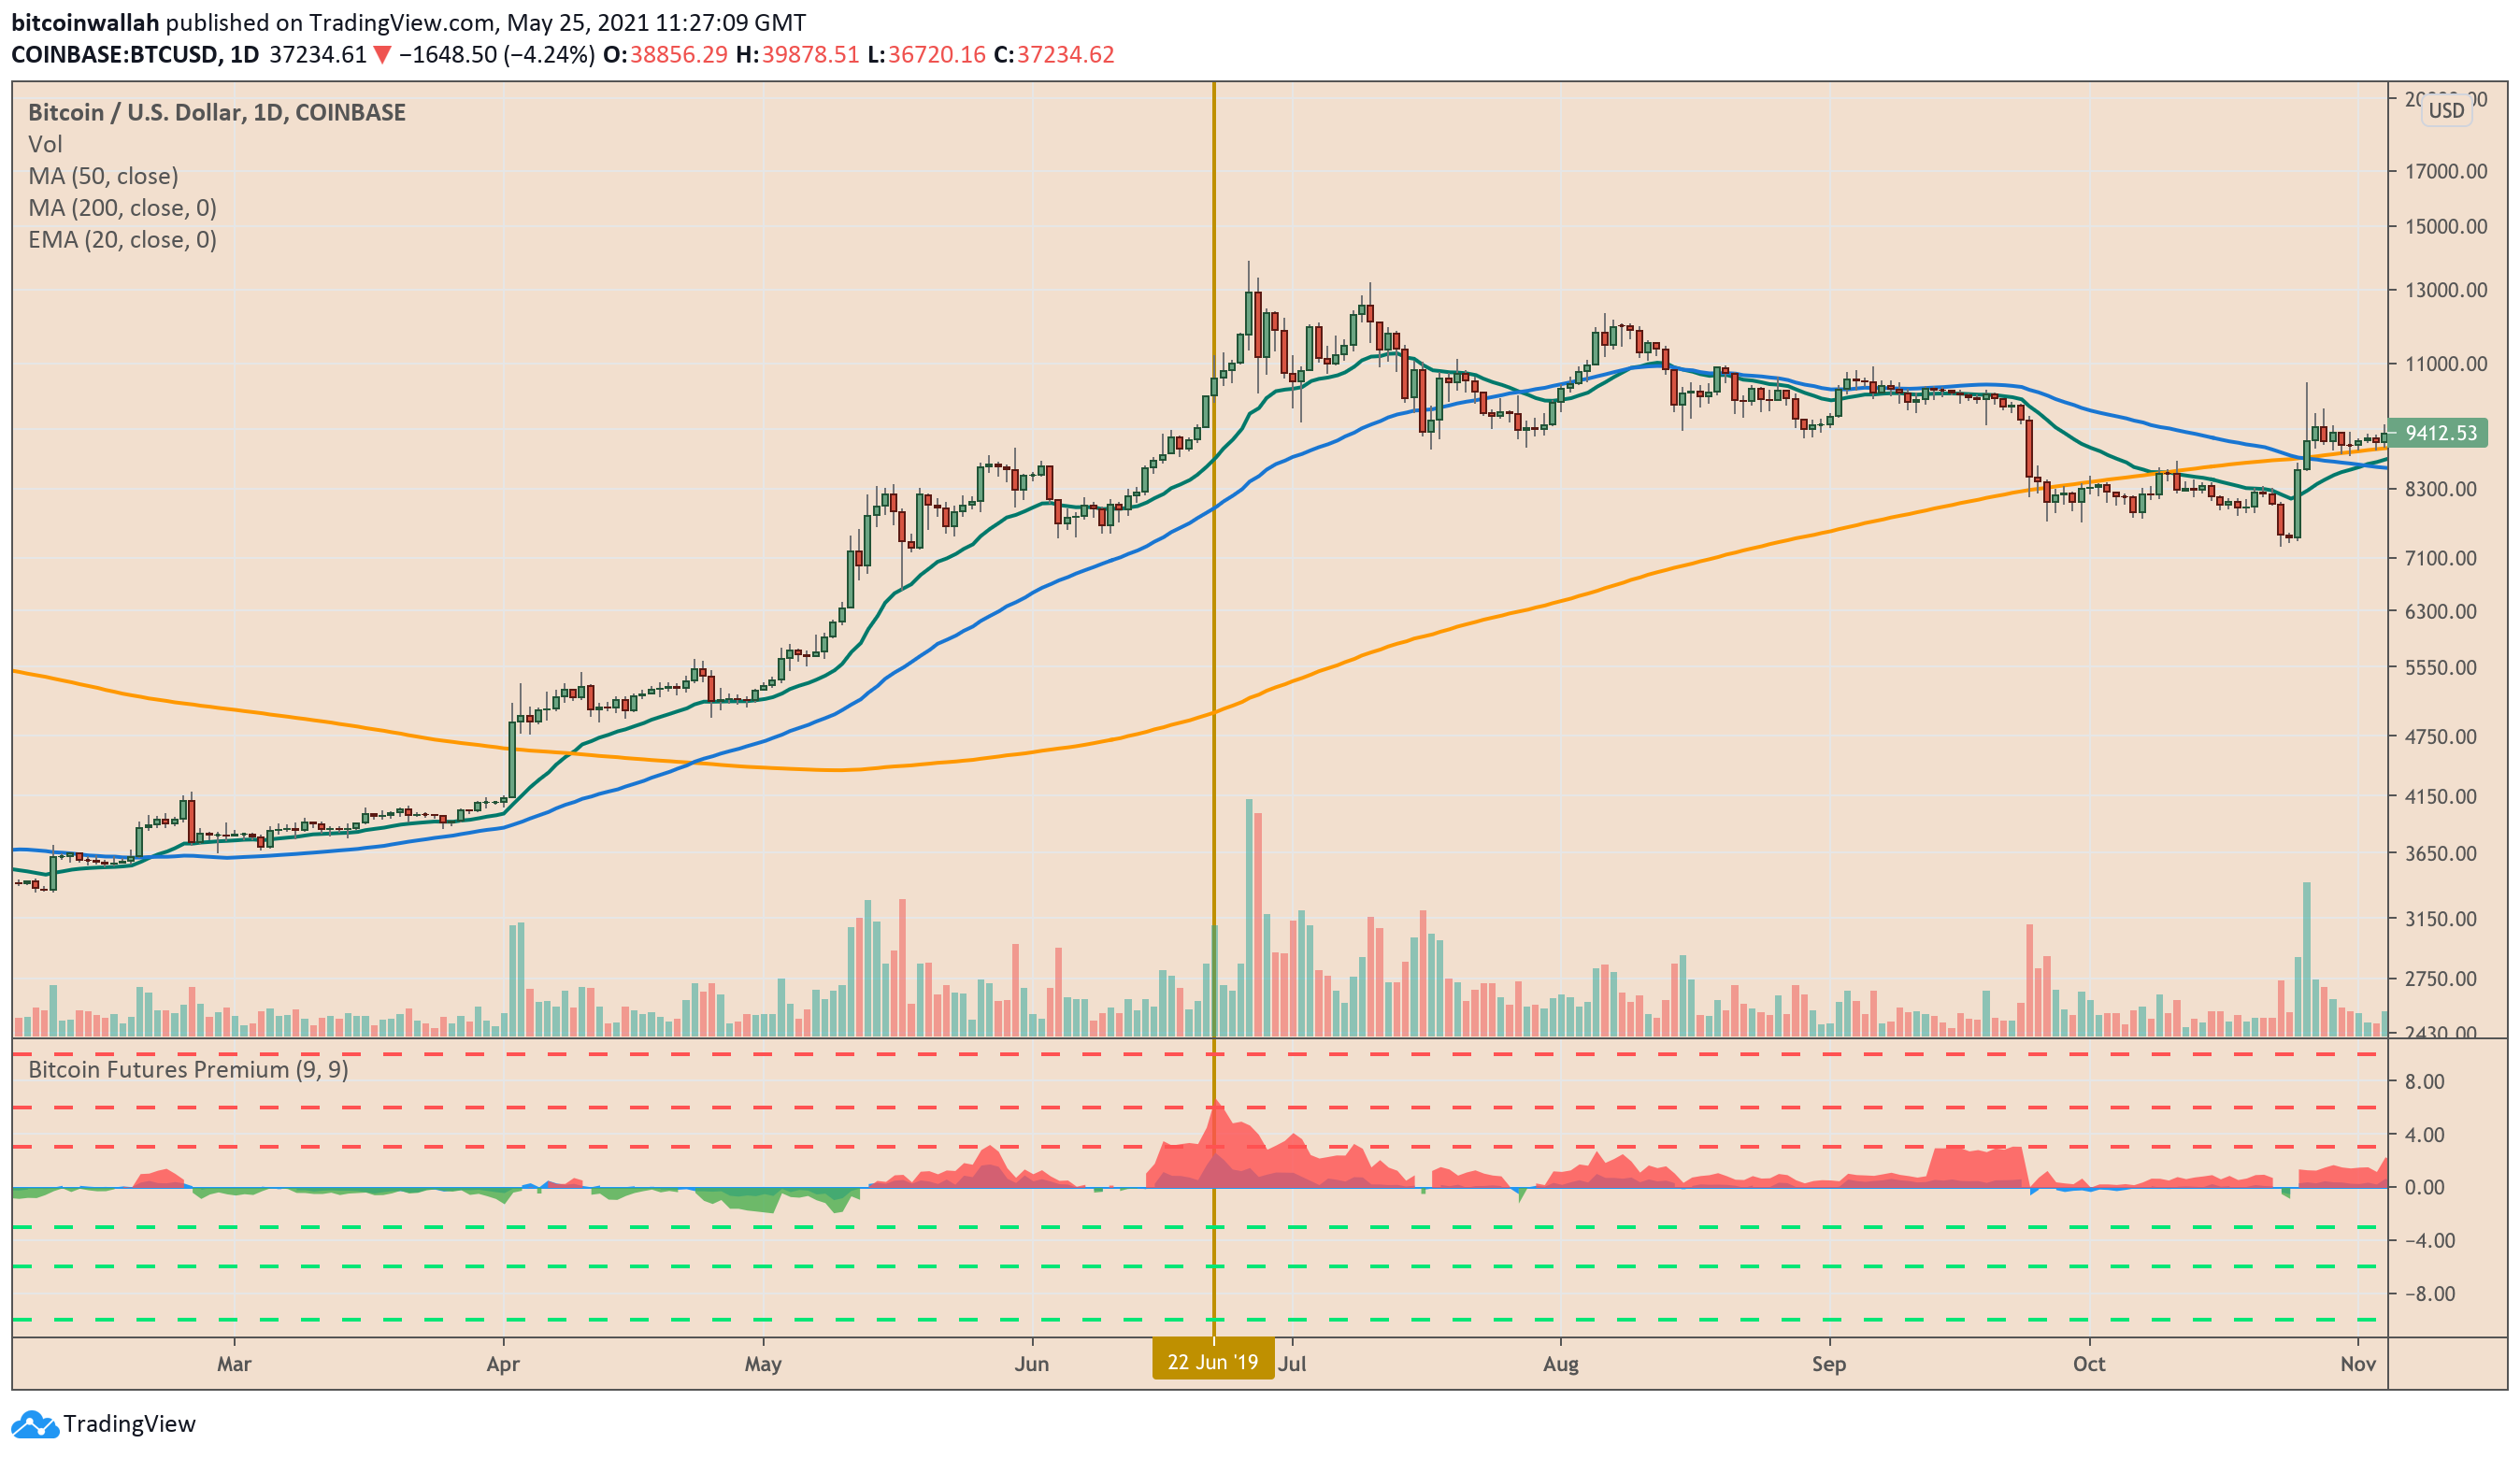 Historically accurate Bitcoin metric suggests BTC price has bottomed out